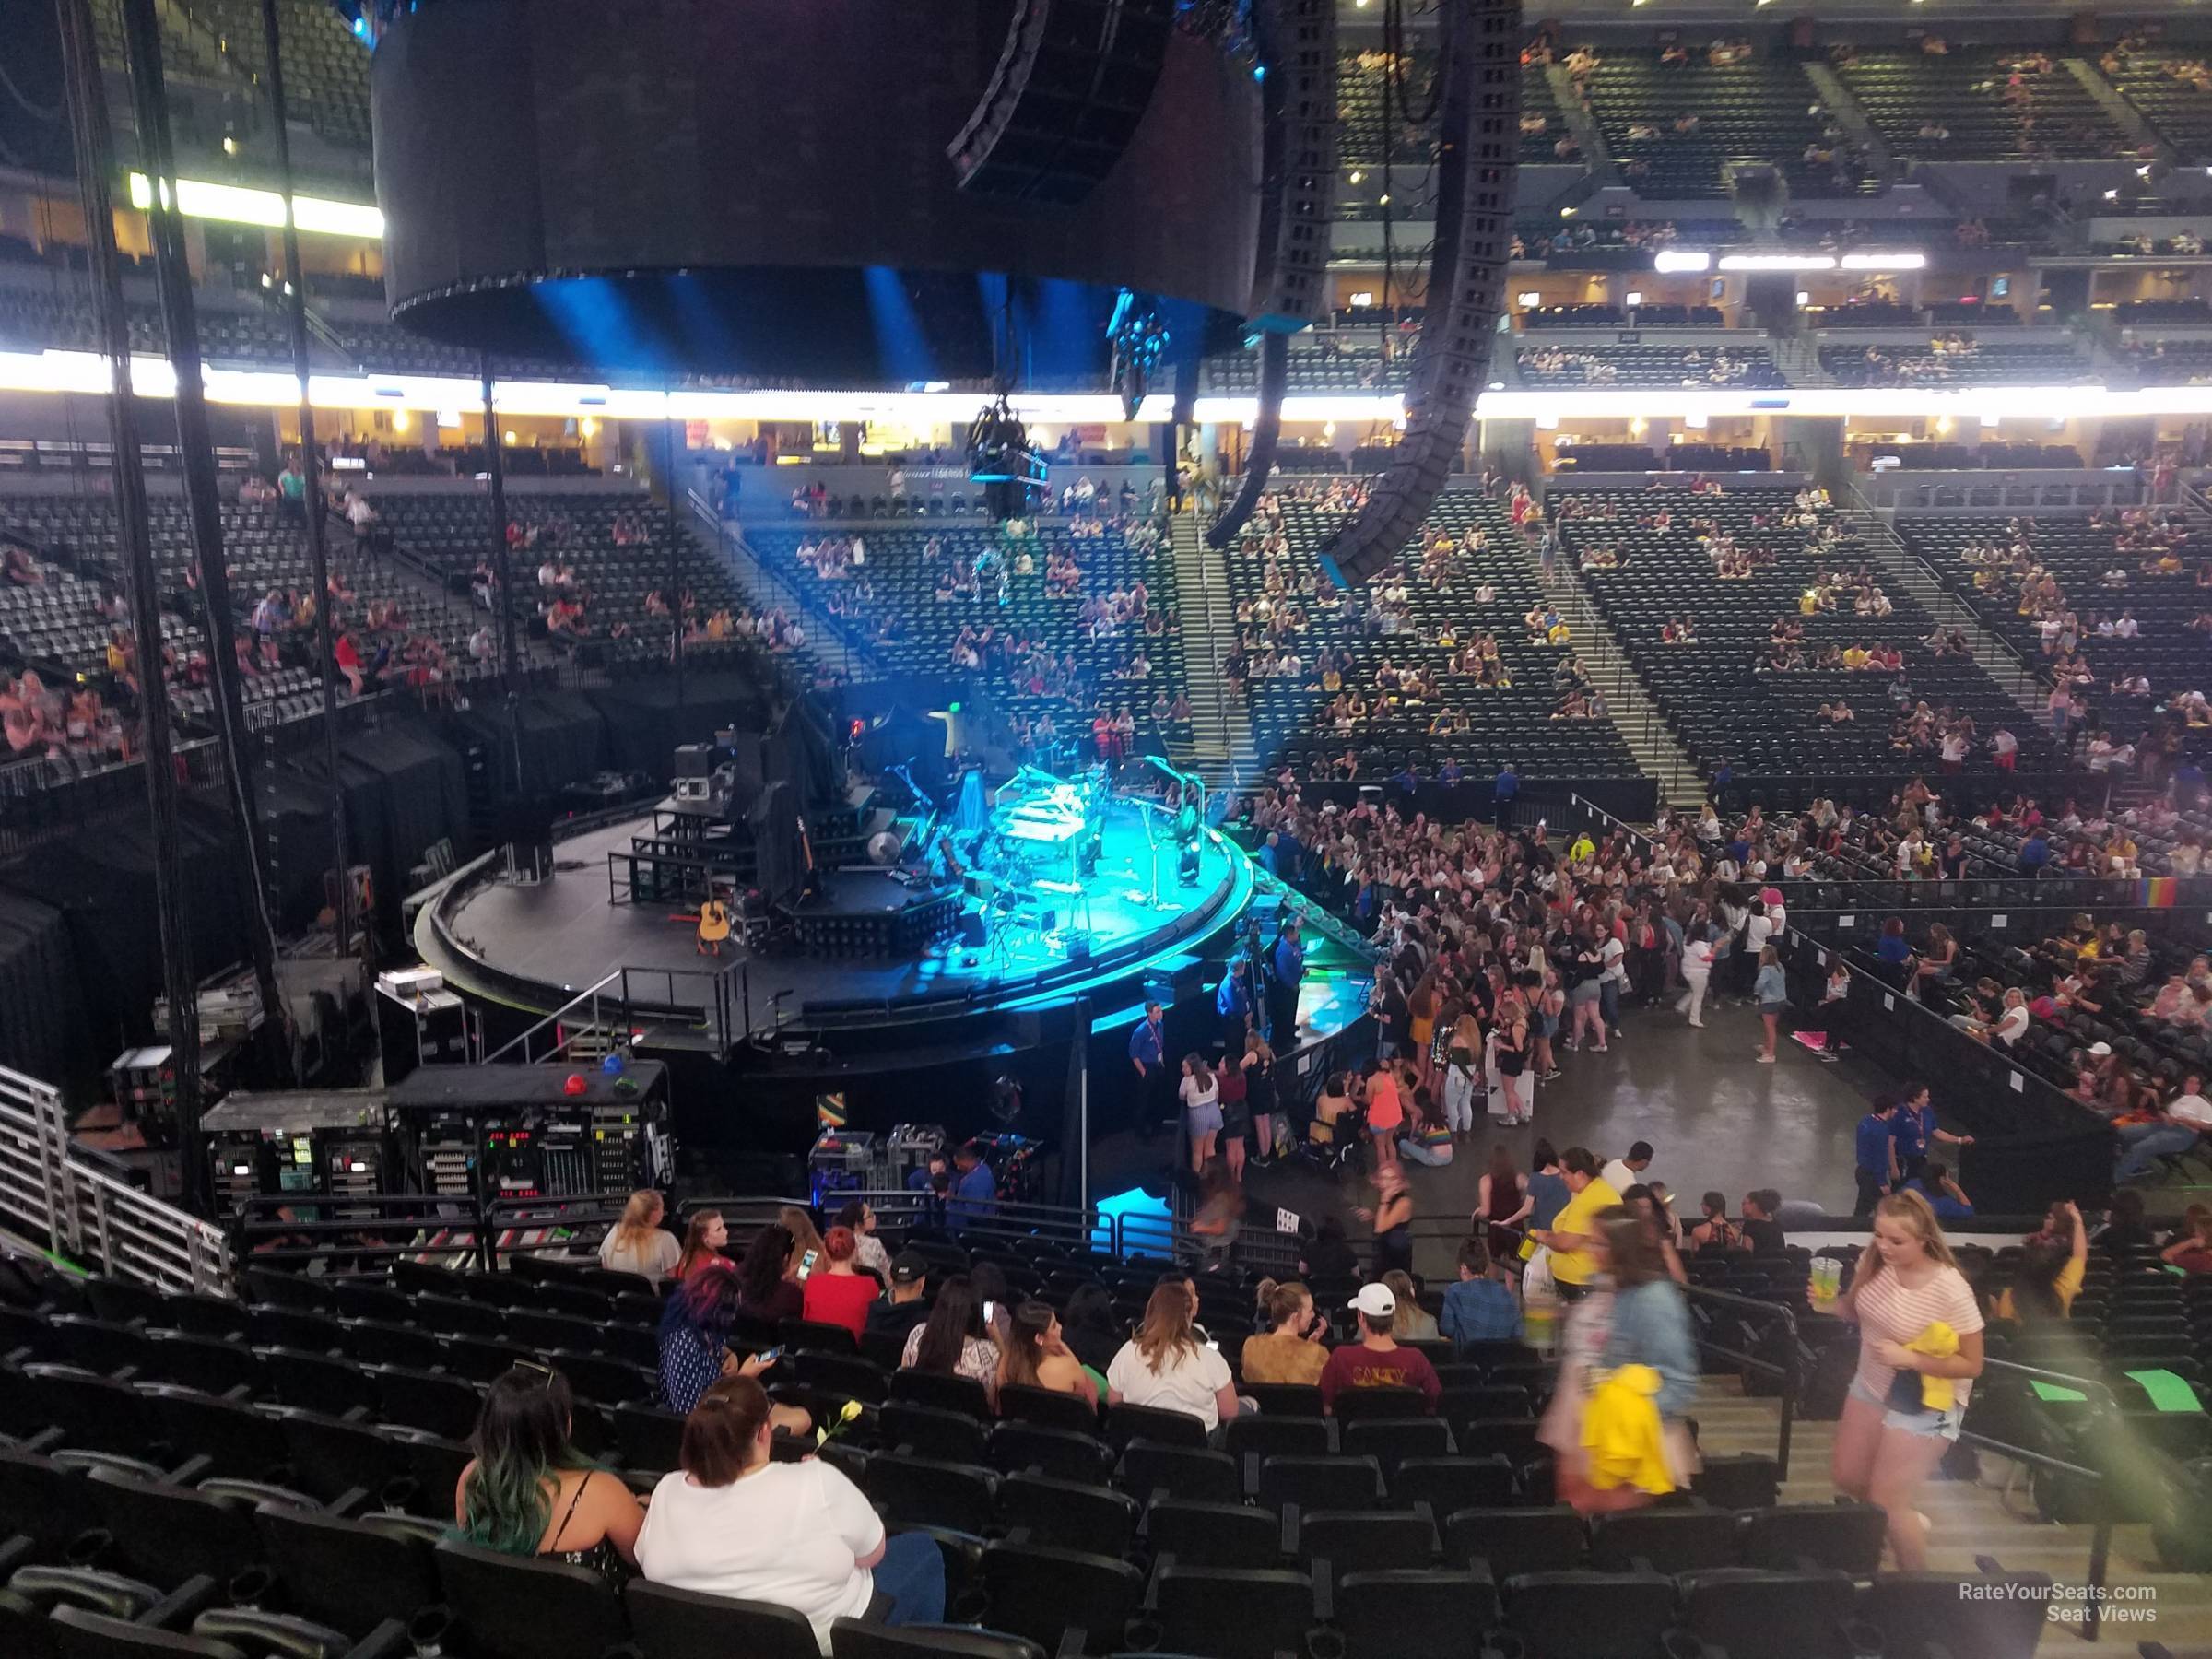 section 130, row 19 seat view  for concert - ball arena